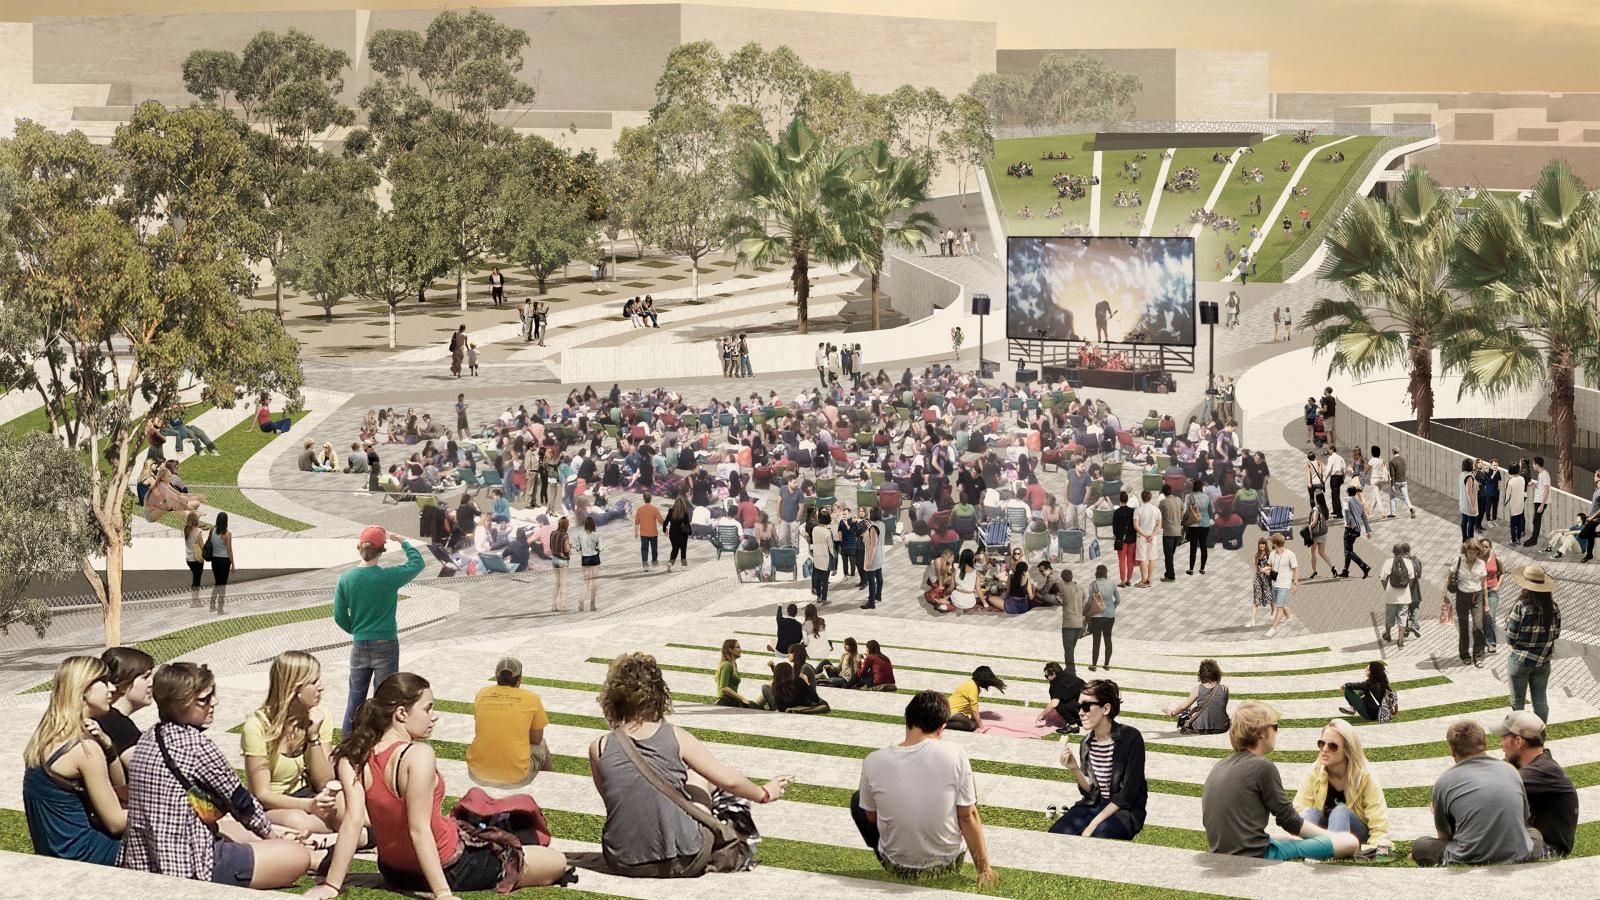 Outdoor amphitheater scene with people seated on tiered steps watching a large screen showing a concert. Trees, greenery, and buildings surround the area, including Cato St nearby. Many viewers are sitting on the ground while others are standing, creating a lively and social atmosphere.